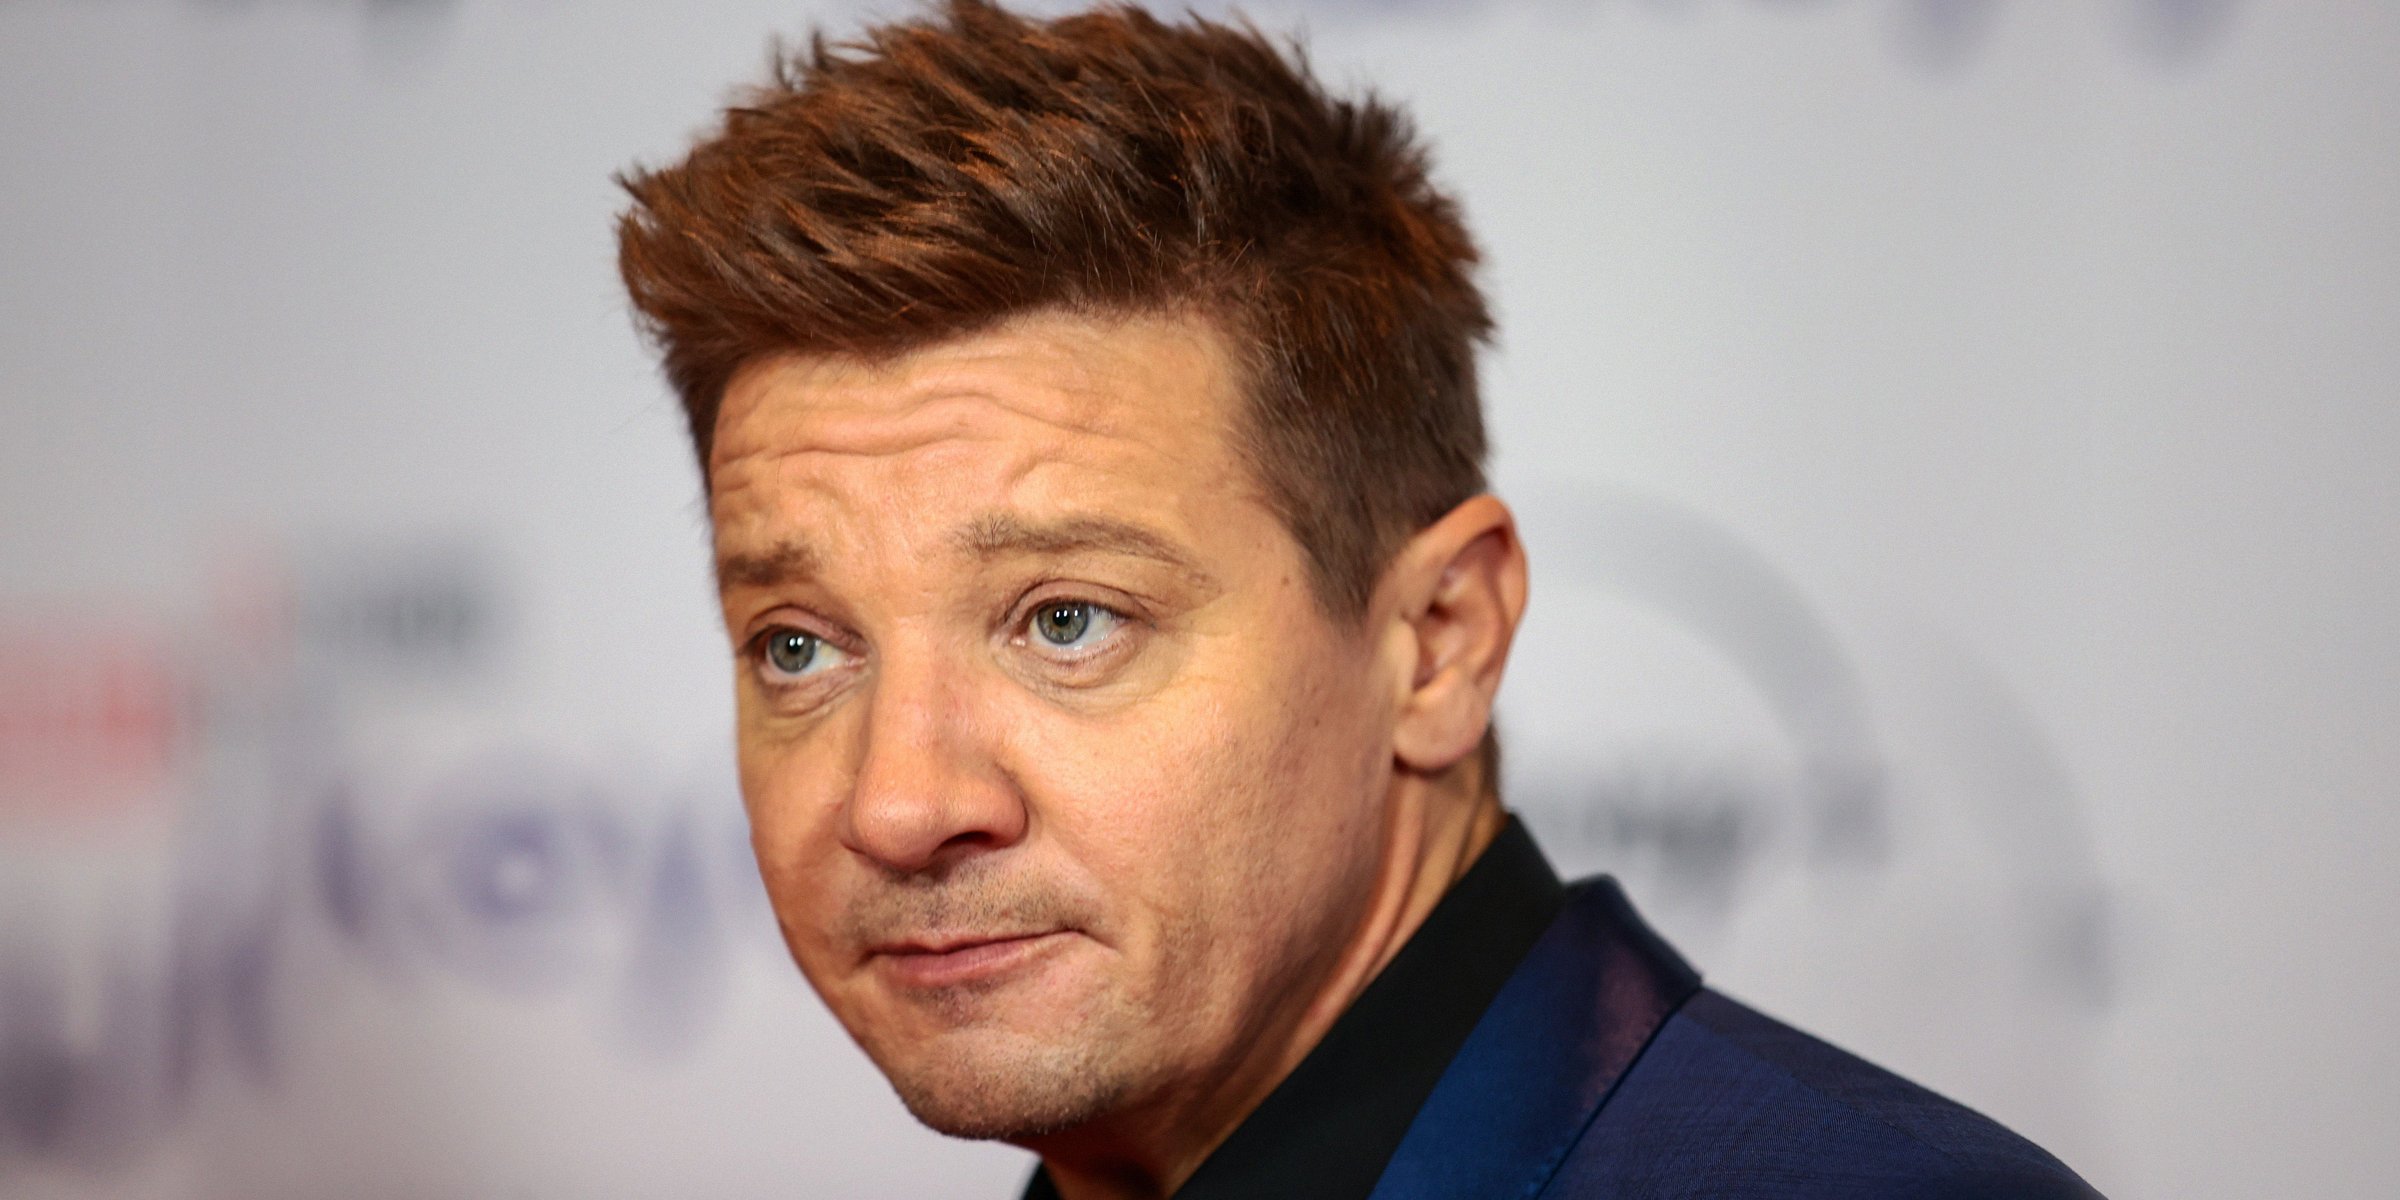 Jeremy Renner | Source: Getty Images